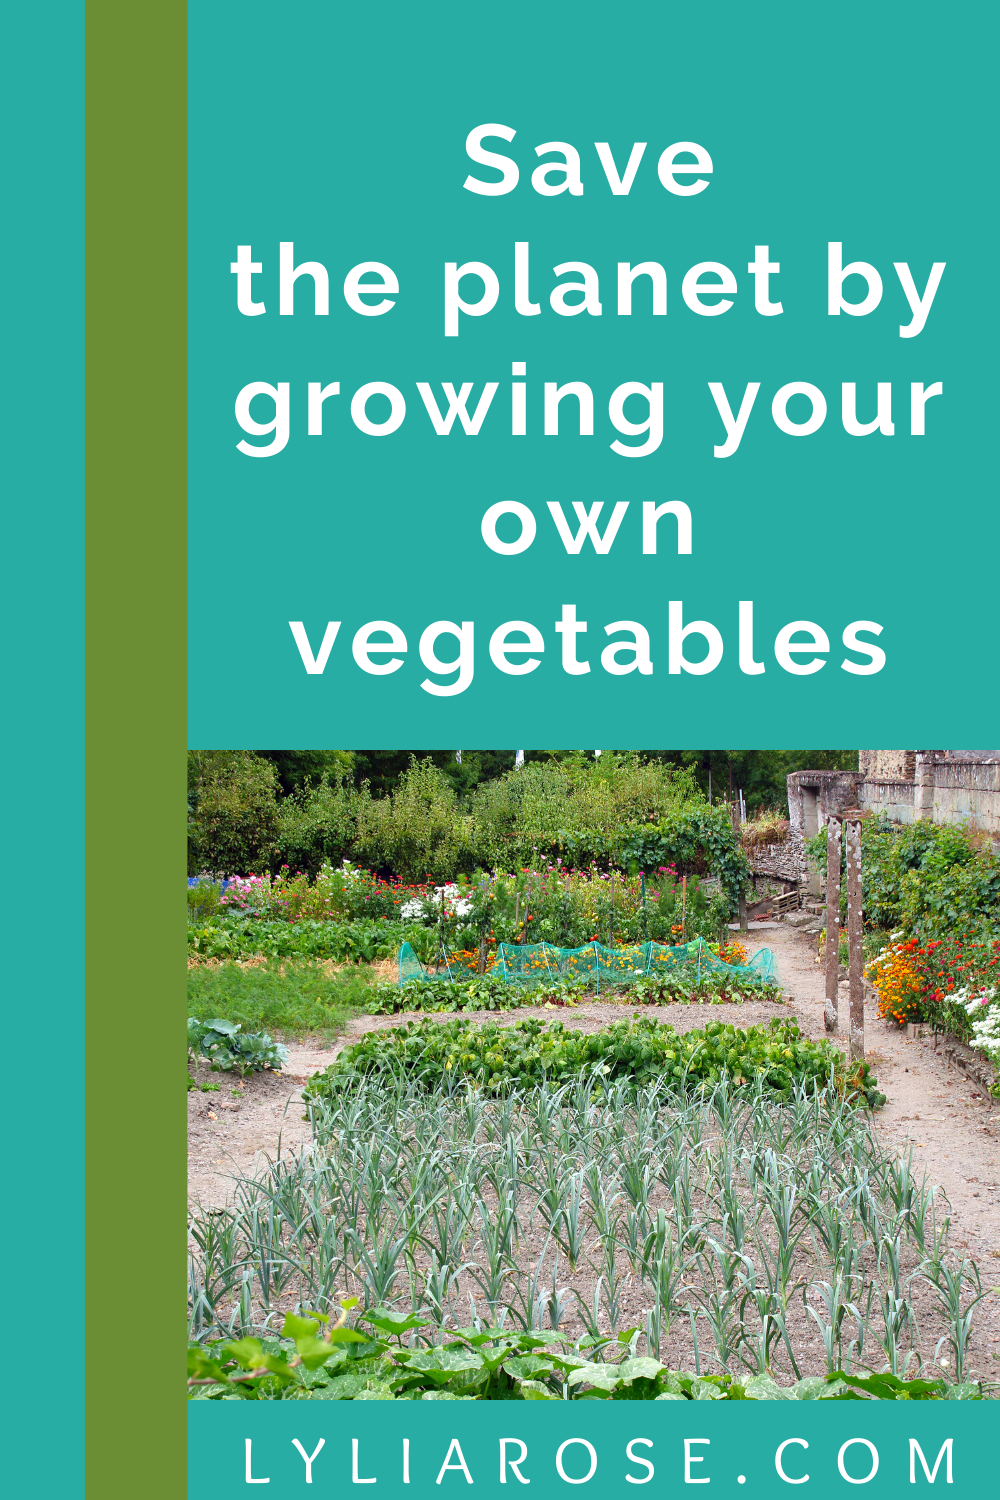 save money + the planet by growing your own vegetables (1)